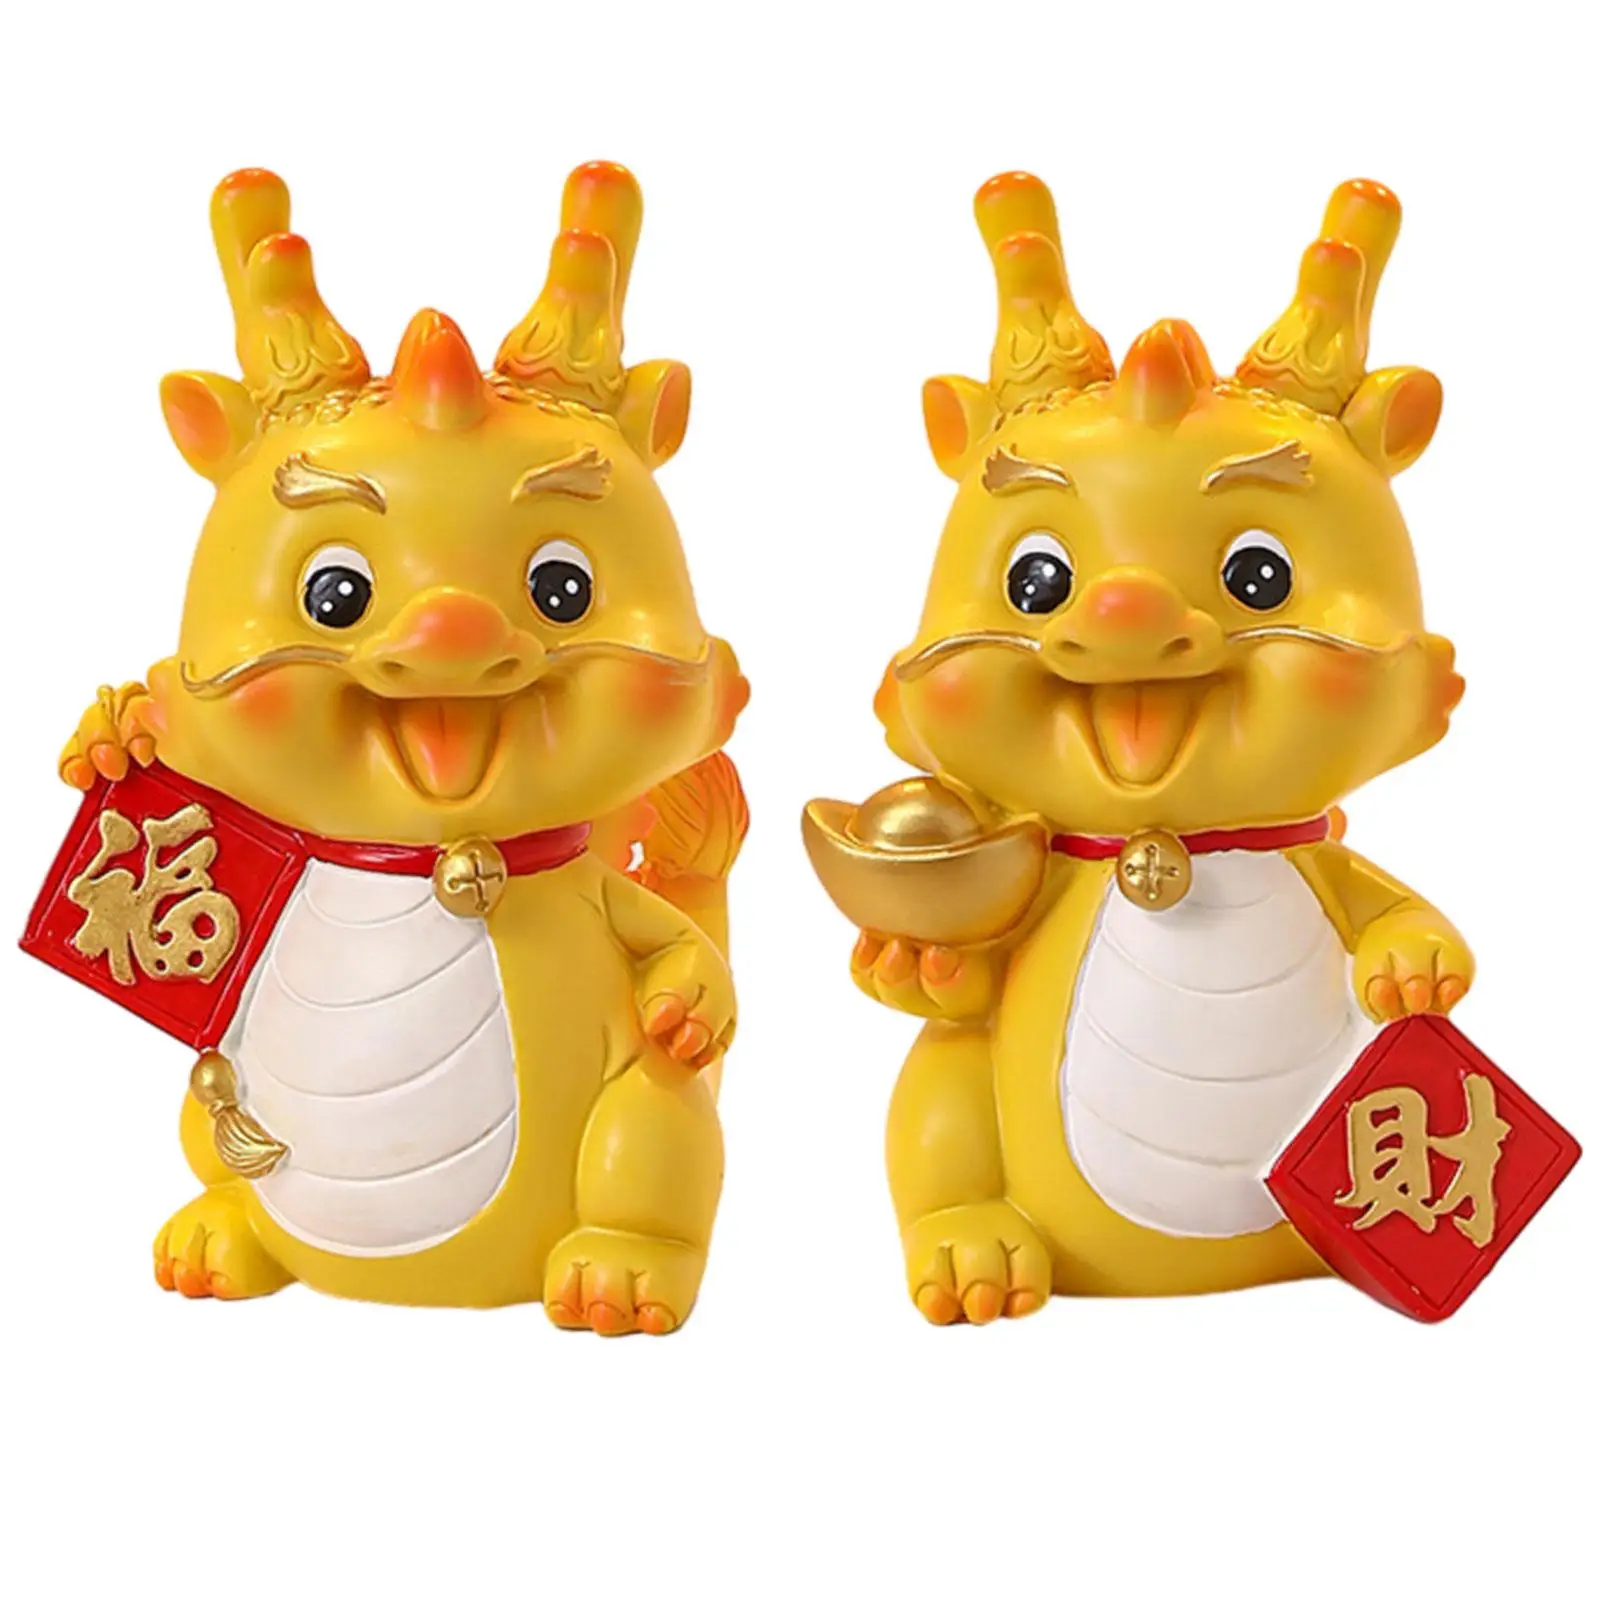 Dragon Statue Money Bank Sculpture for Study Room New Year Gifts Bookshelf